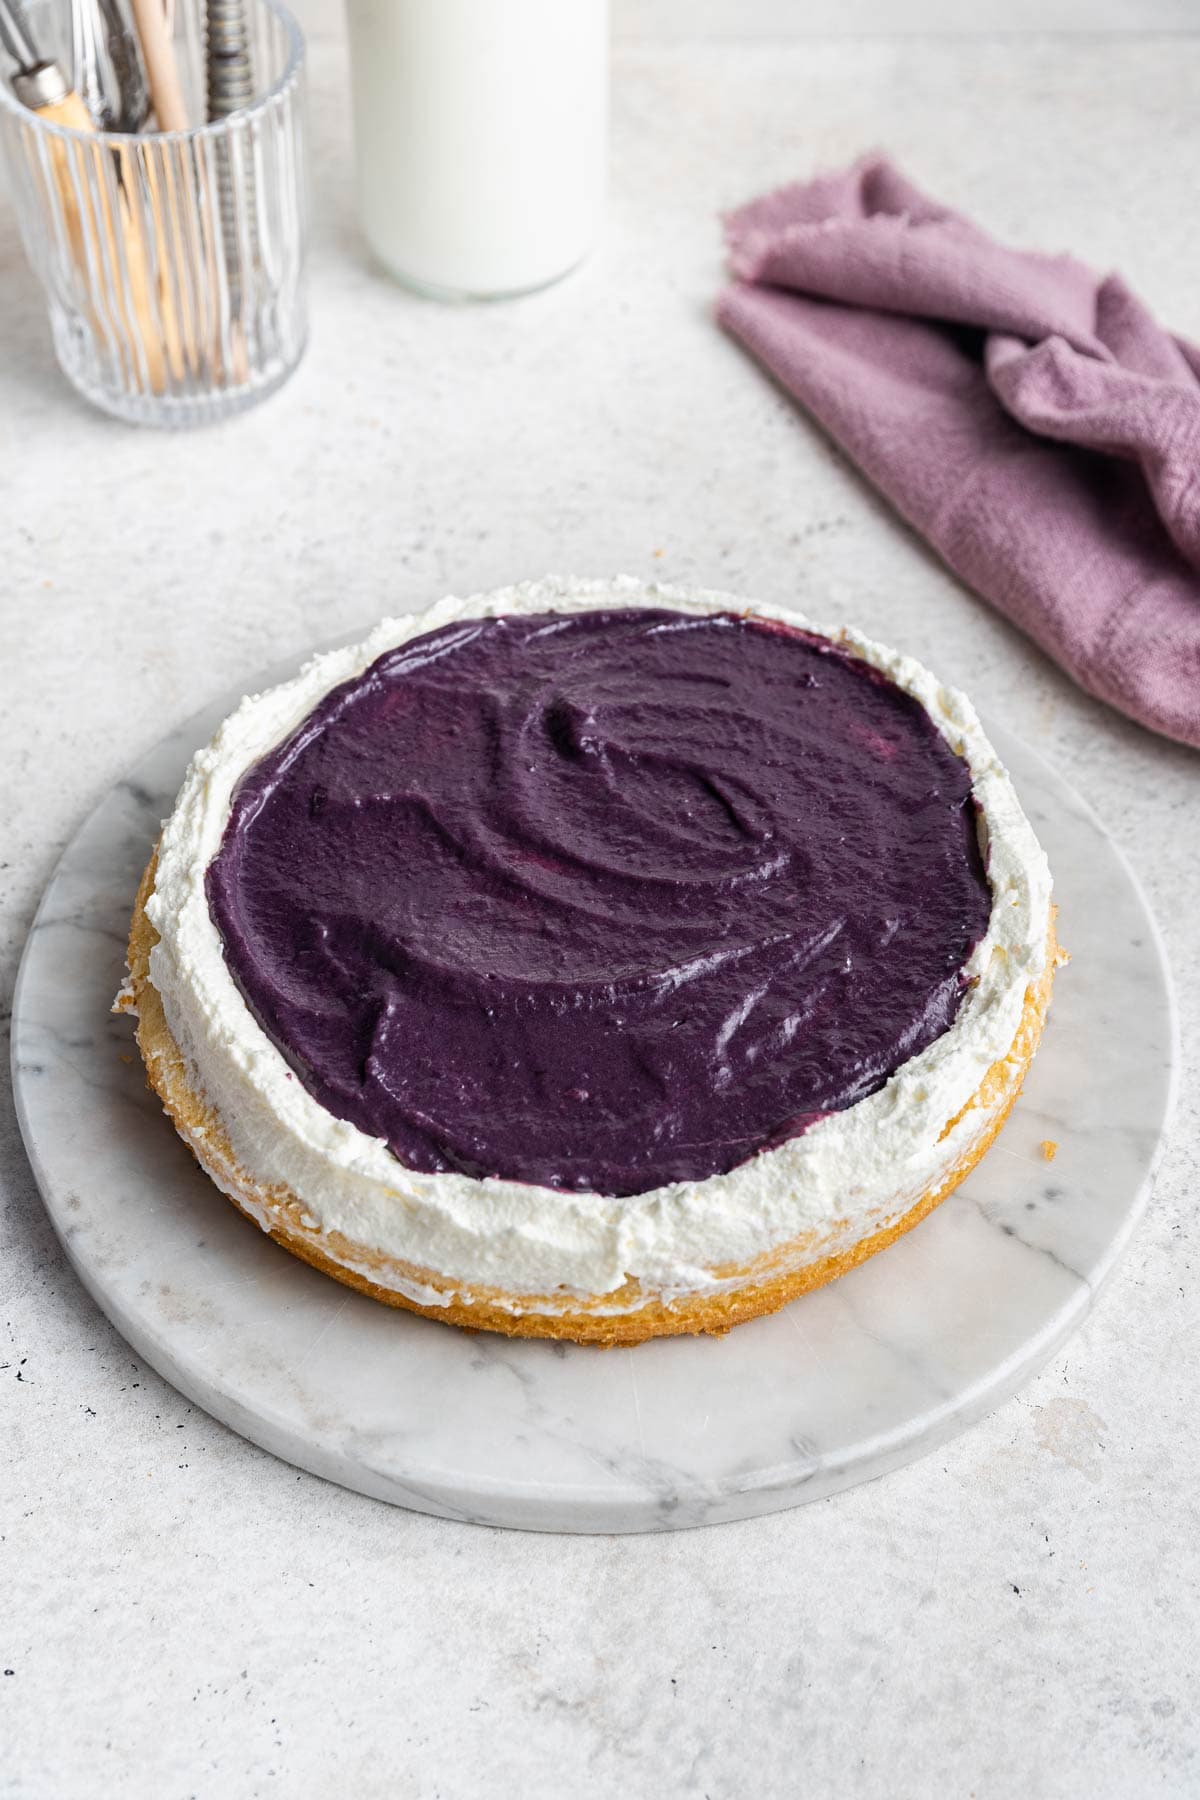 thick layer of blueberry cardamom curd spread on top of whipped cream frosting